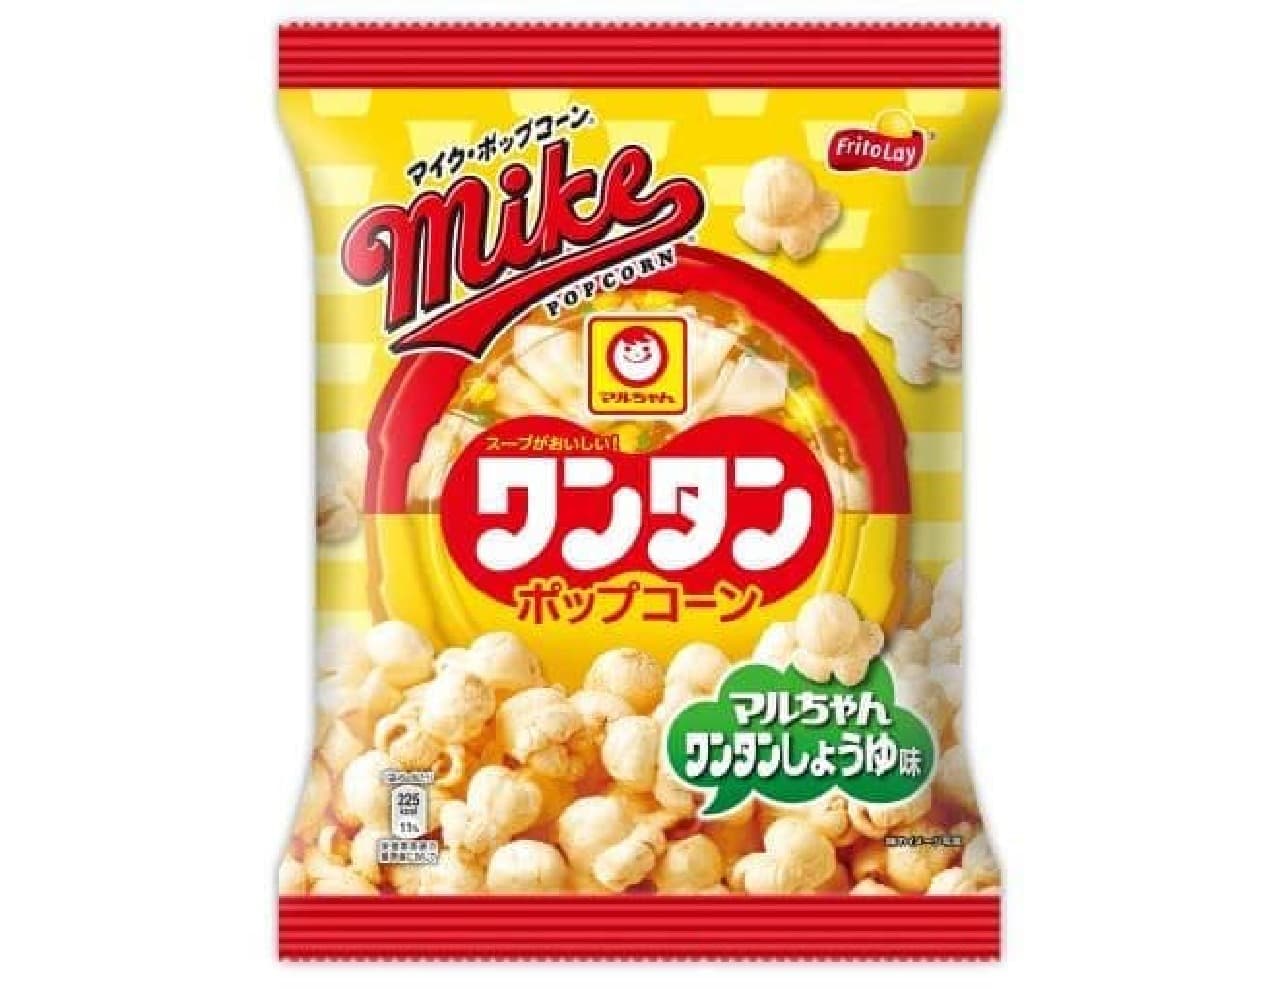 "Mike Popcorn Wonton Soy Sauce Flavor" is a popcorn that reproduces the soup of "Soy Sauce Flavor" and the taste of wonton.